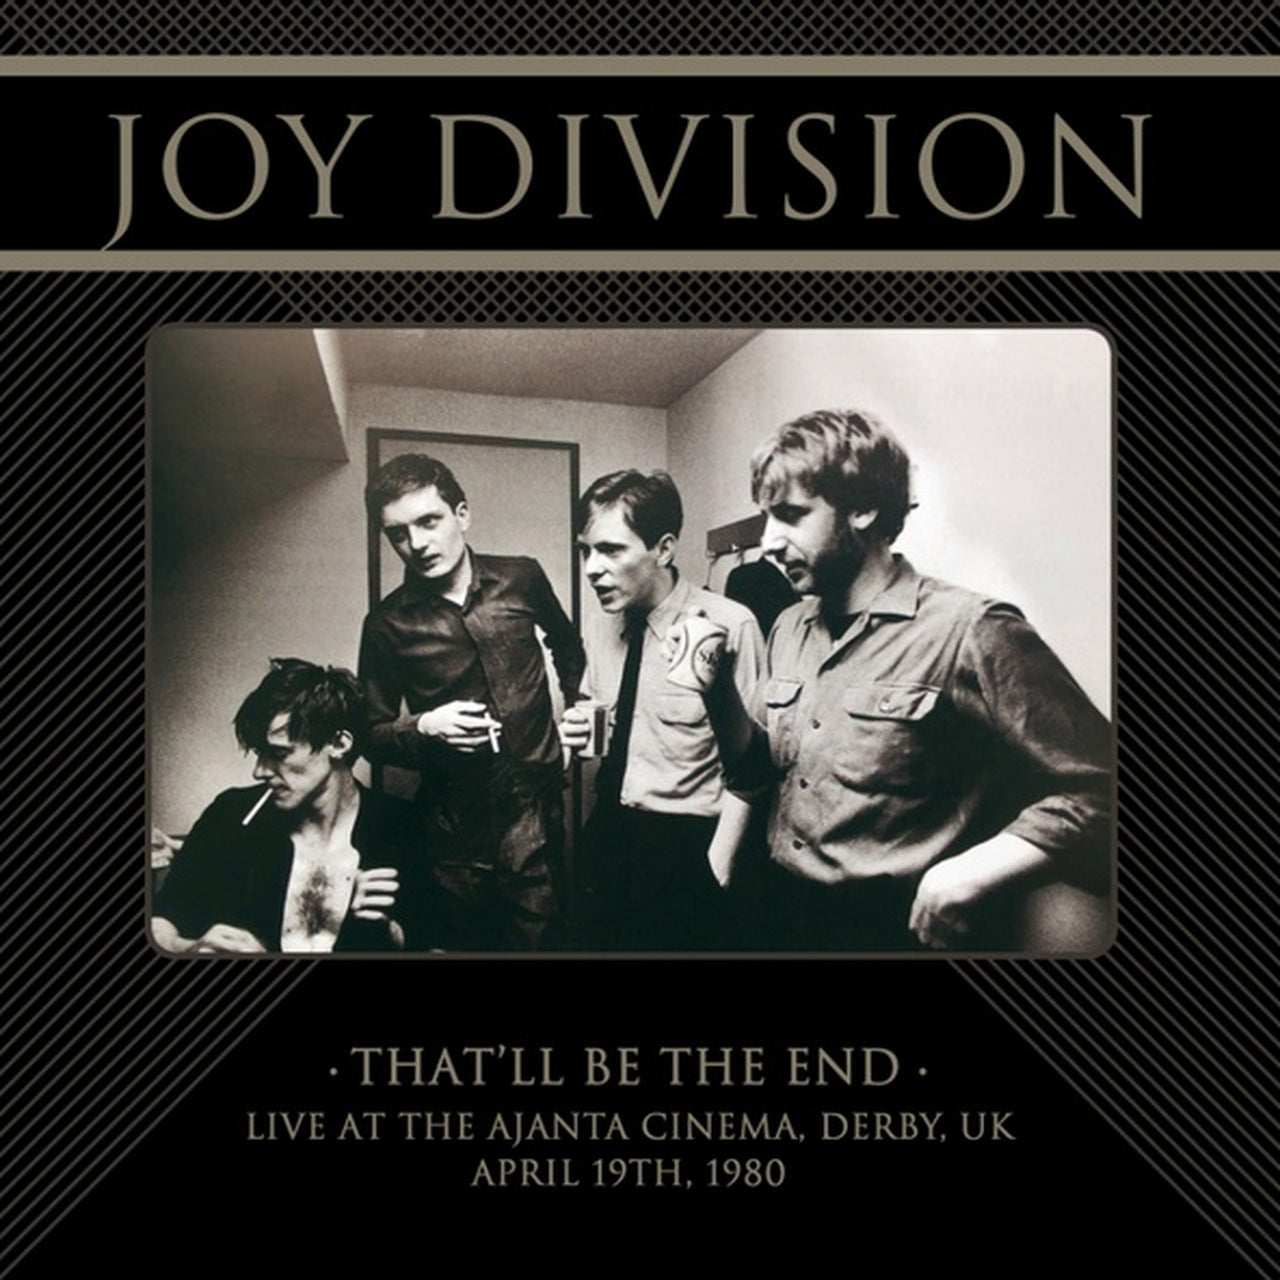 Joy Division "That'll Be The End: Live At The Ajanta Cinema, Derby, UK, April 19th, 1980" LP